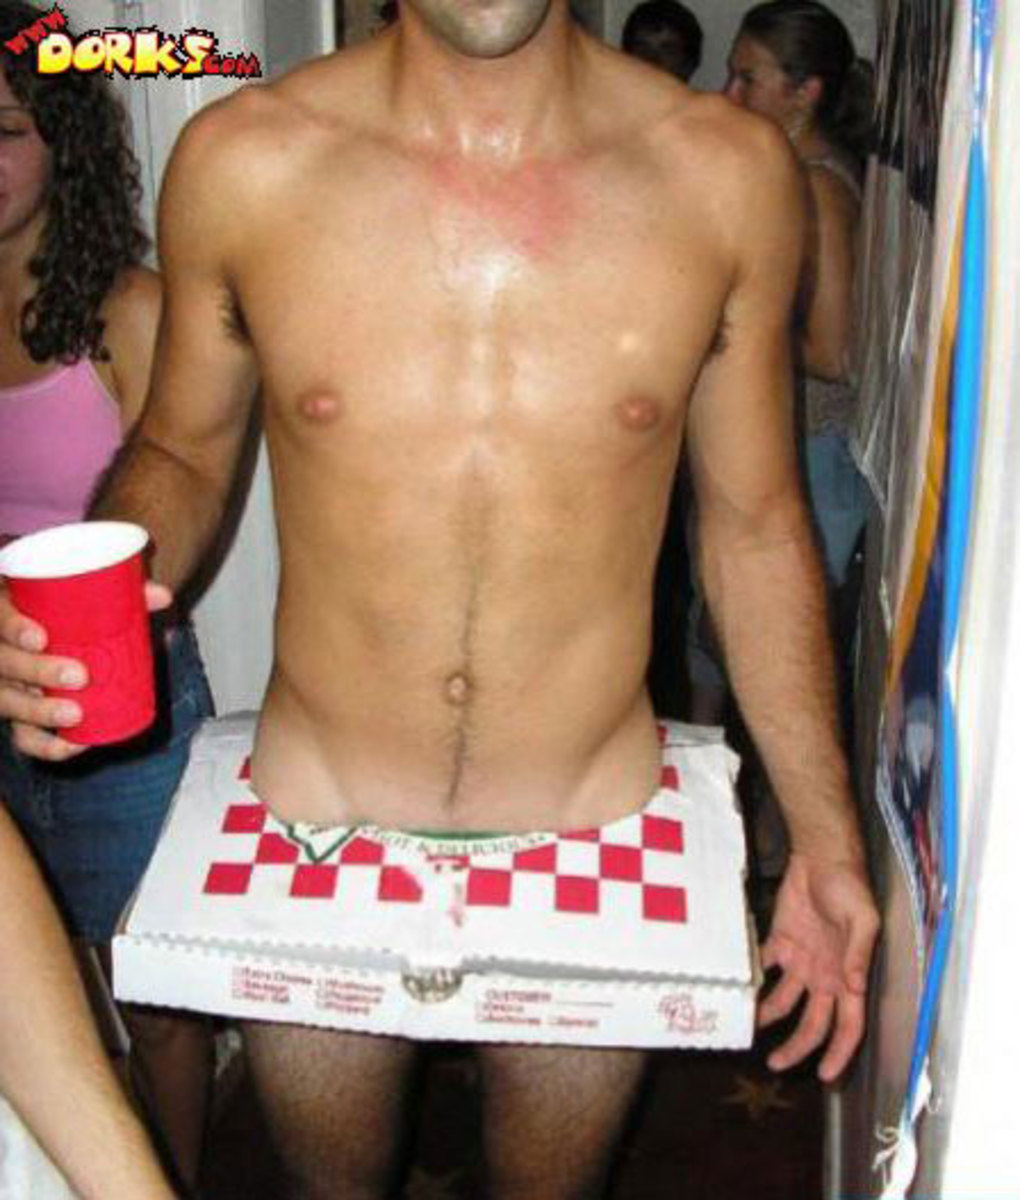 Pizza guy: a dinner and costume, all in one!